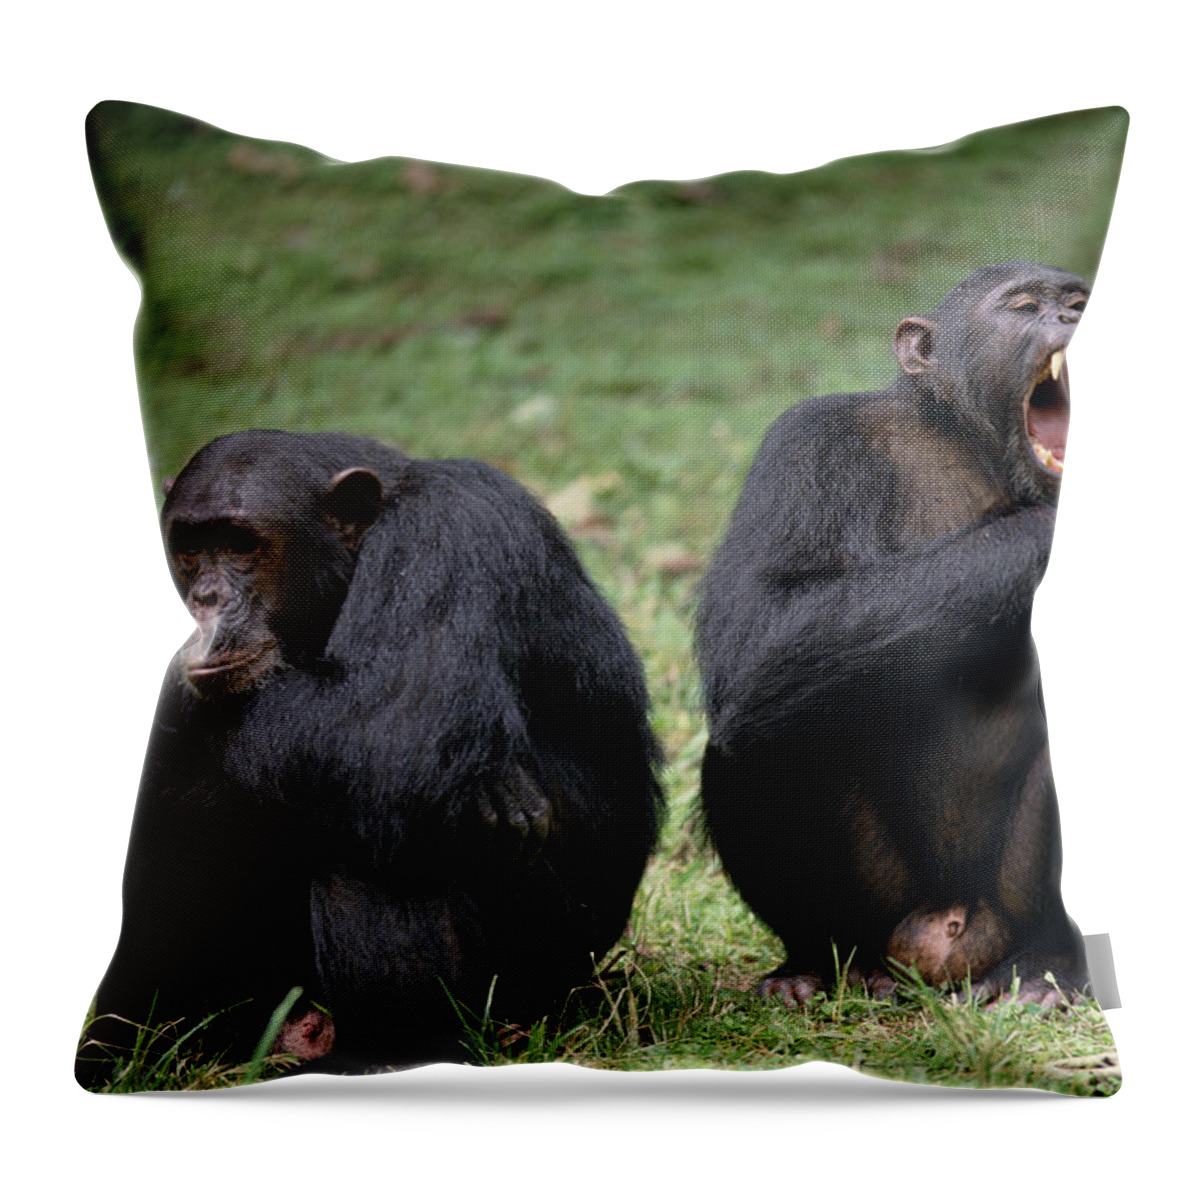 Feb0514 Throw Pillow featuring the photograph Chimpanzee Pair Interacting Gombe Stream by Gerry Ellis